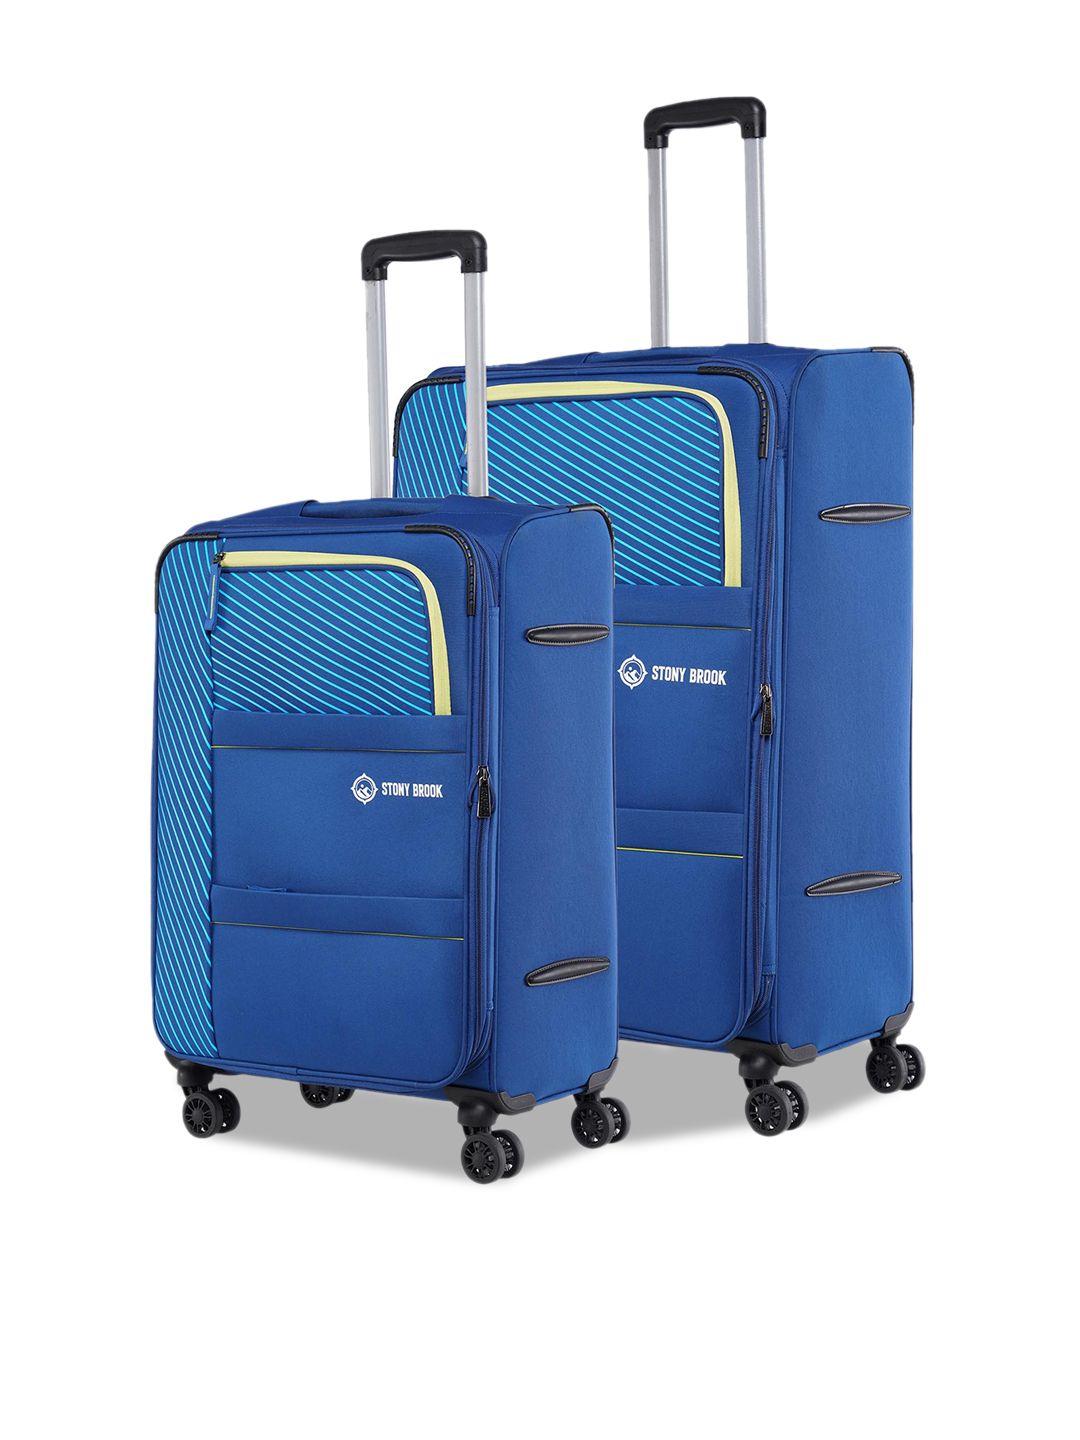 stony brook by nasher miles set of 2 striped soft-sided trolley suitcases